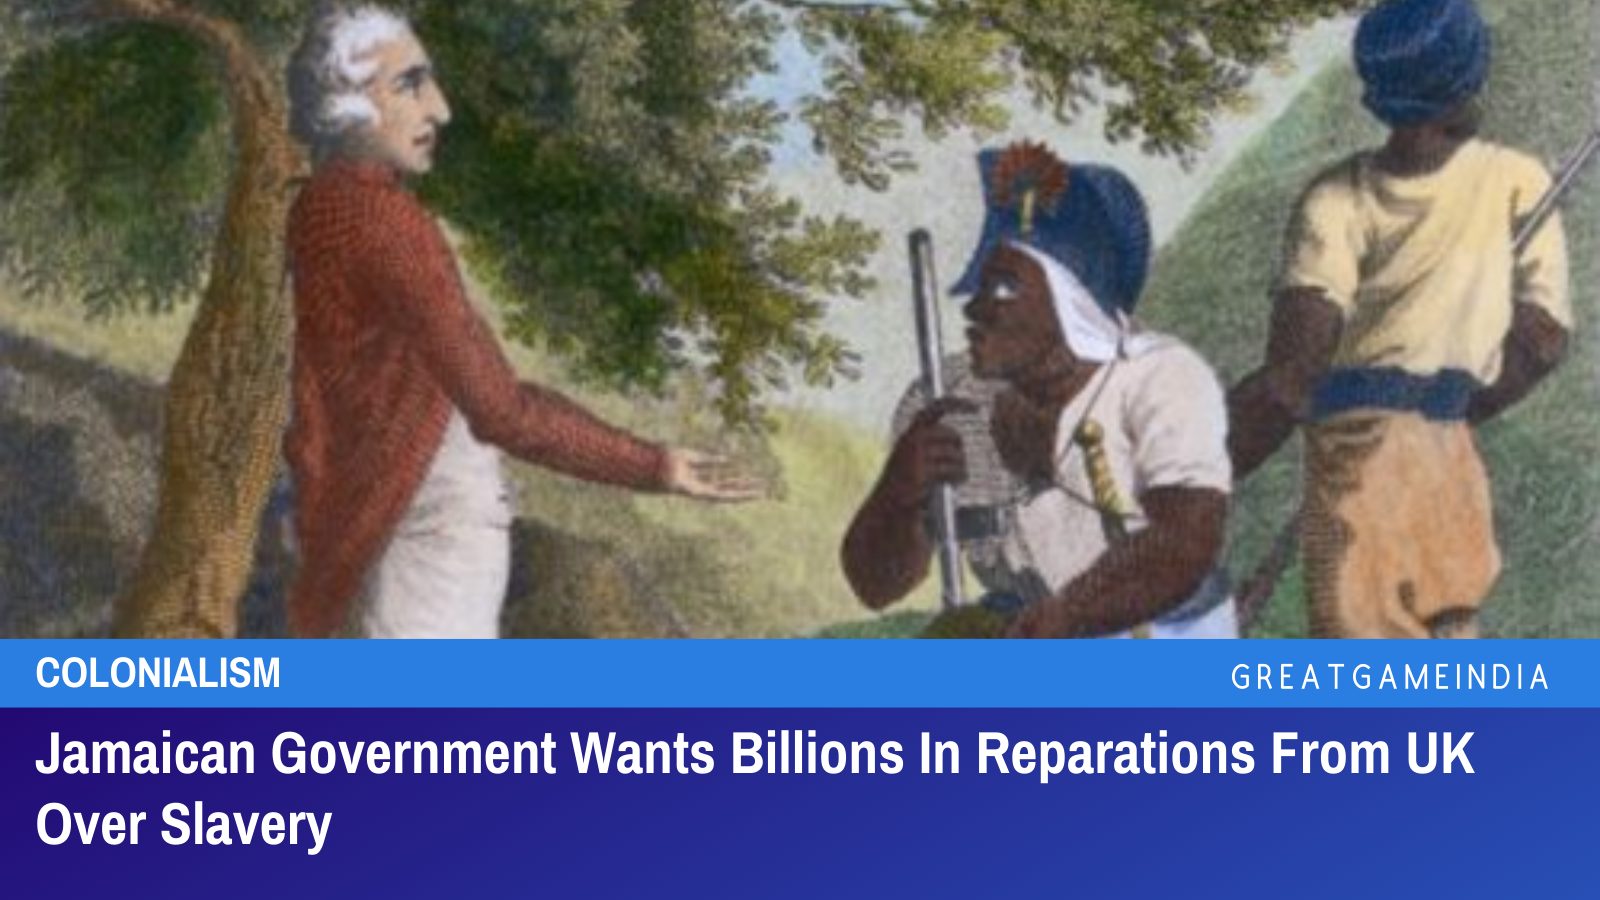 Jamaican Government Wants Billions In Reparations From UK Over Slavery